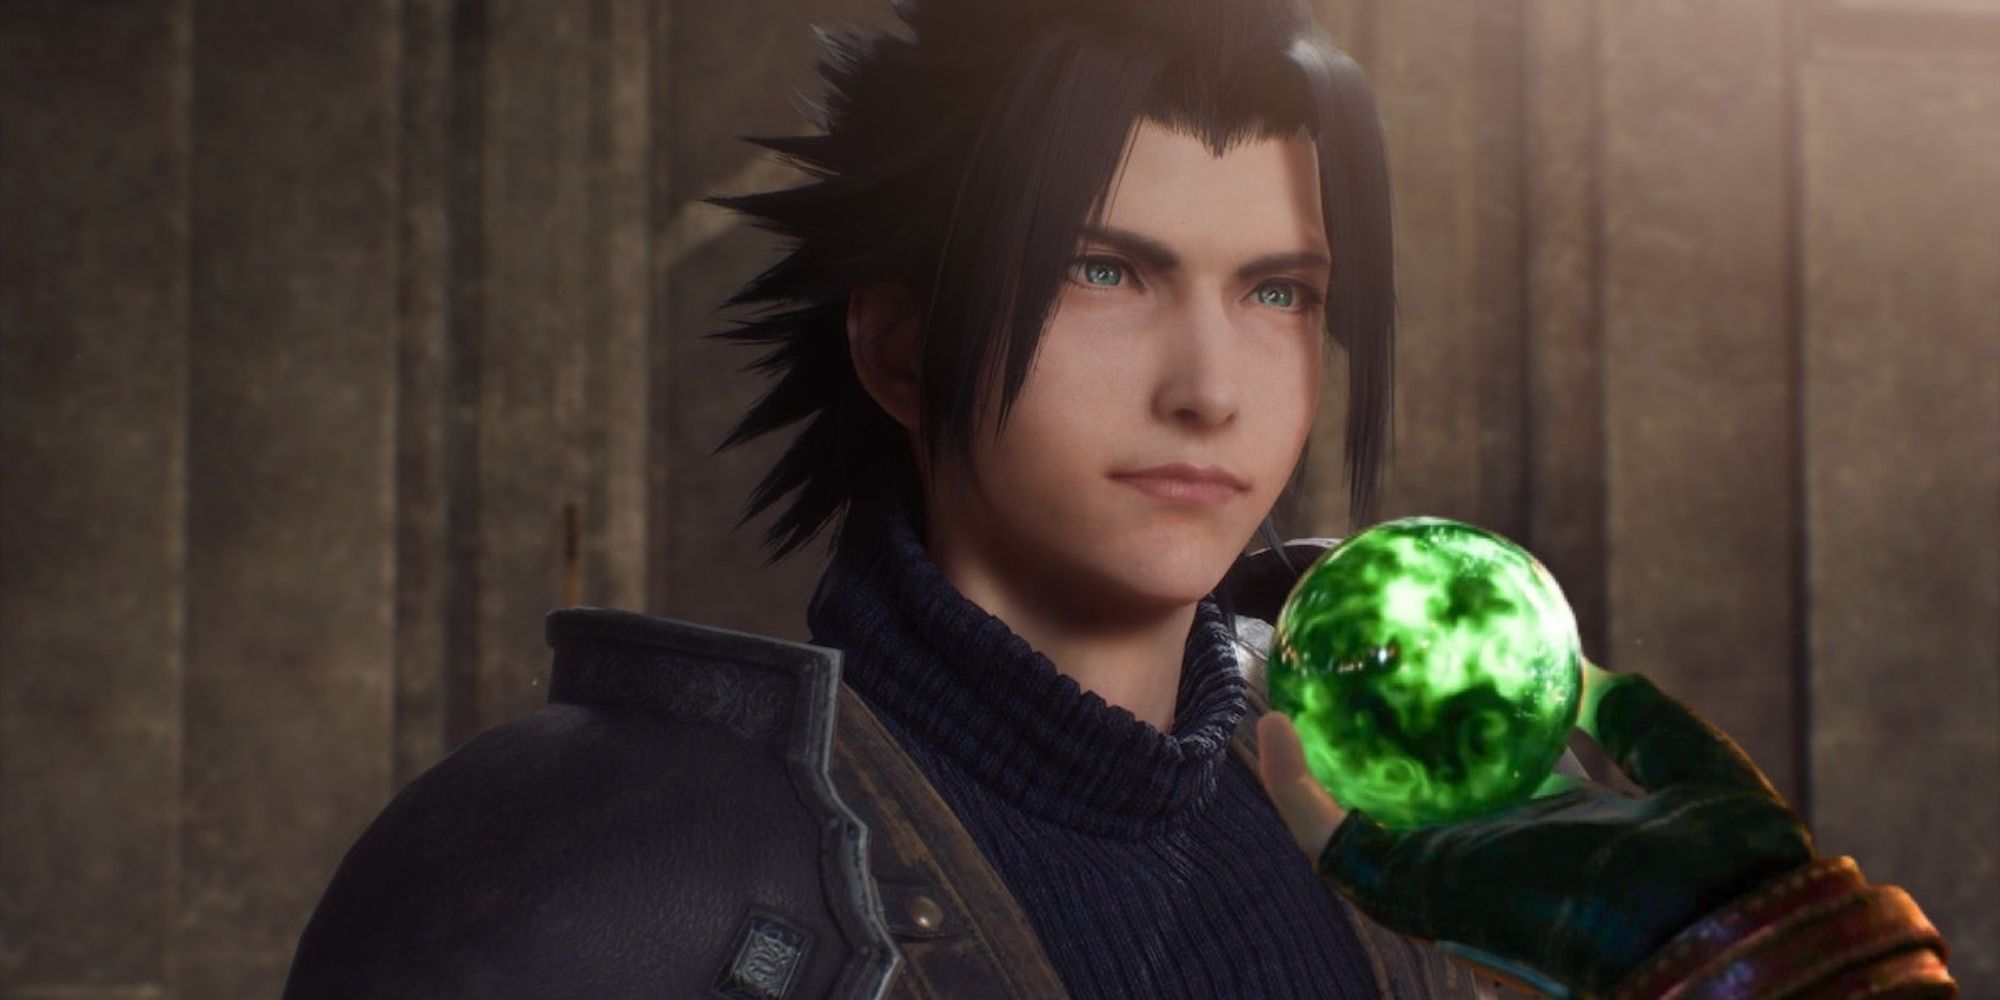 Zack Fair being presented a piece of Materia in Crisis Core: Final Fantasy 7 Reunion